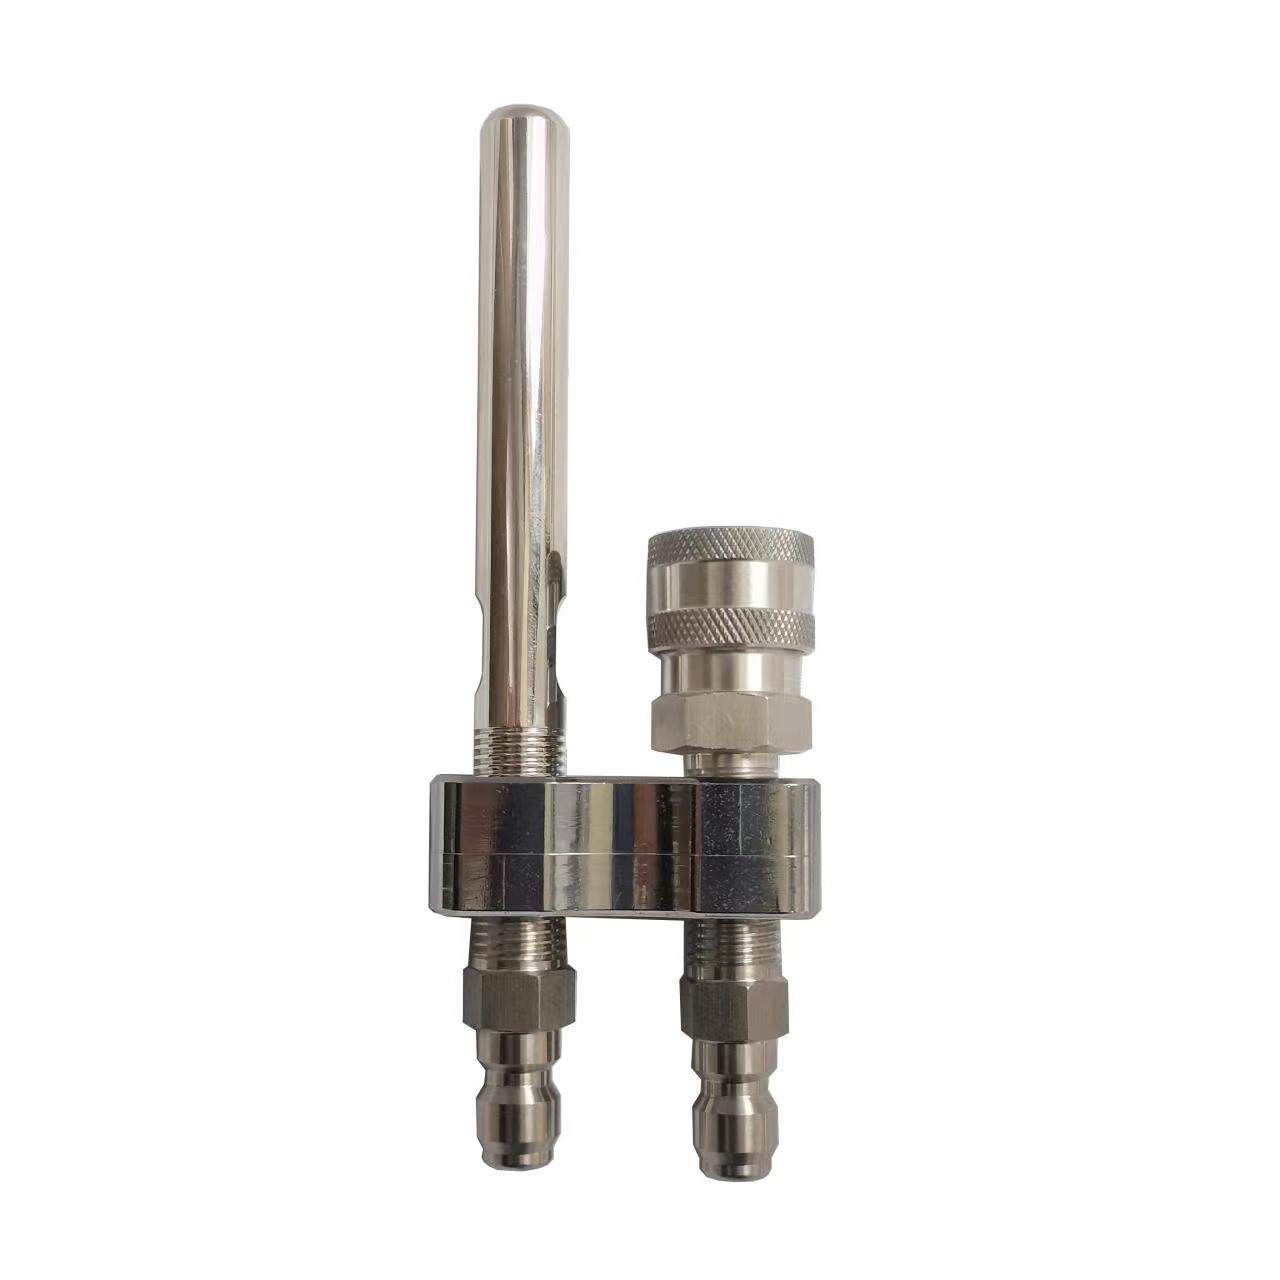 2-Way Holder J rod with Long Rang Nozzle and Coupler 2WH109-CS107-LRN300